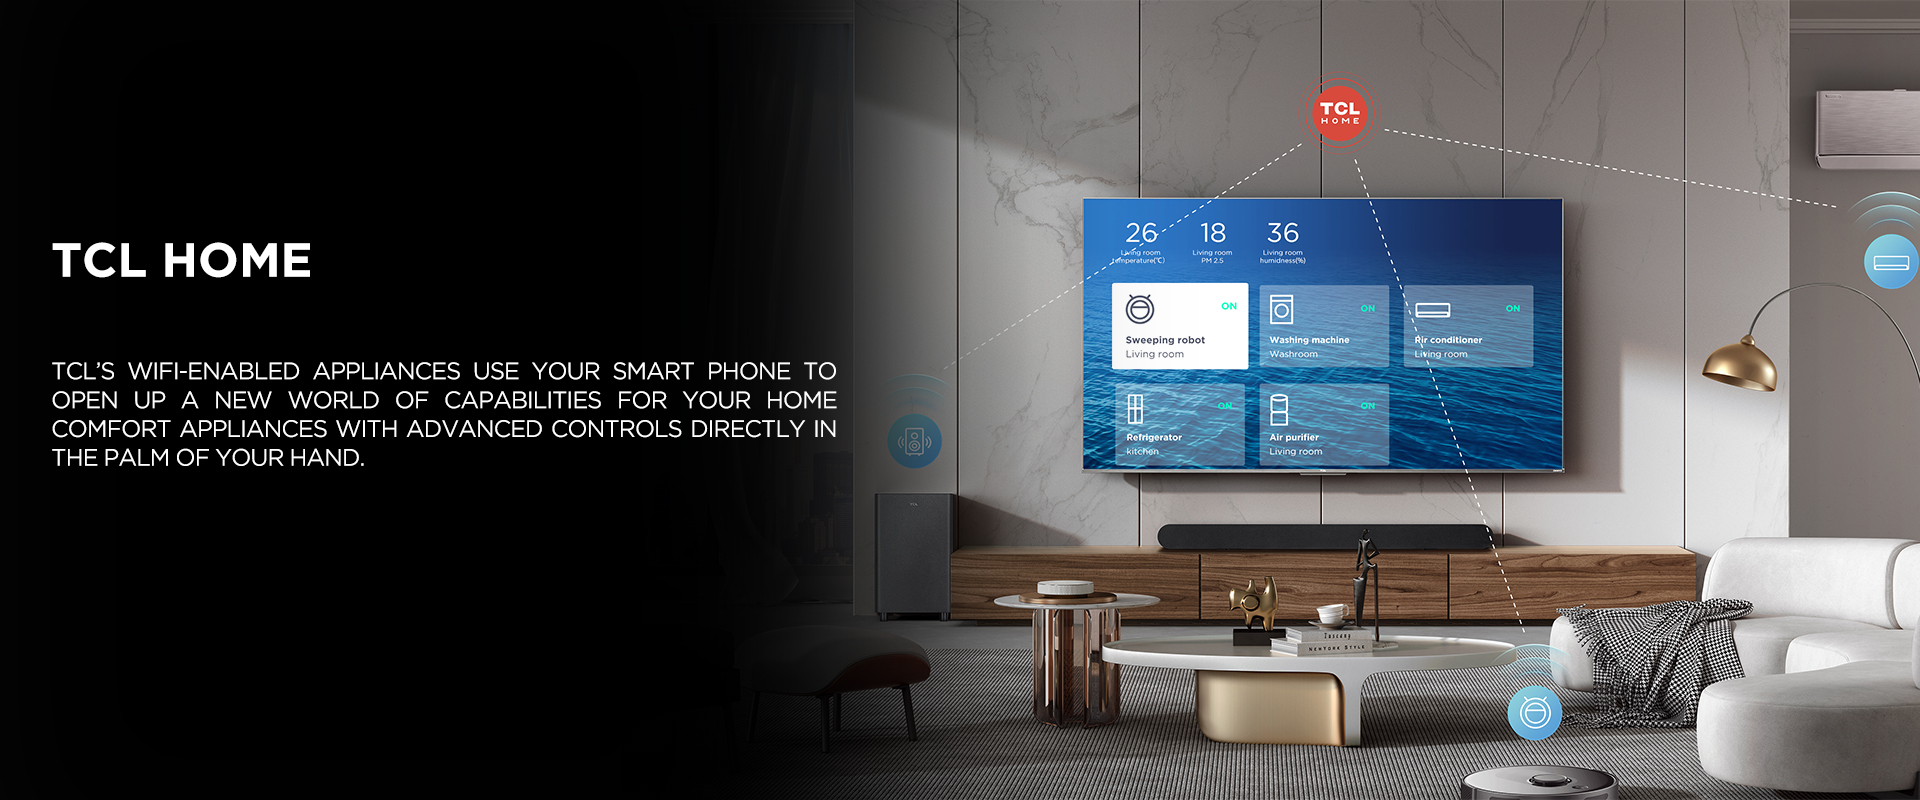 TCL HOME - TCLƒ??s WiFi-enabled appliances use your smart phone to open up a new world of capabilities for your home comfort appliances with advanced controls directly in the palm of your hand.